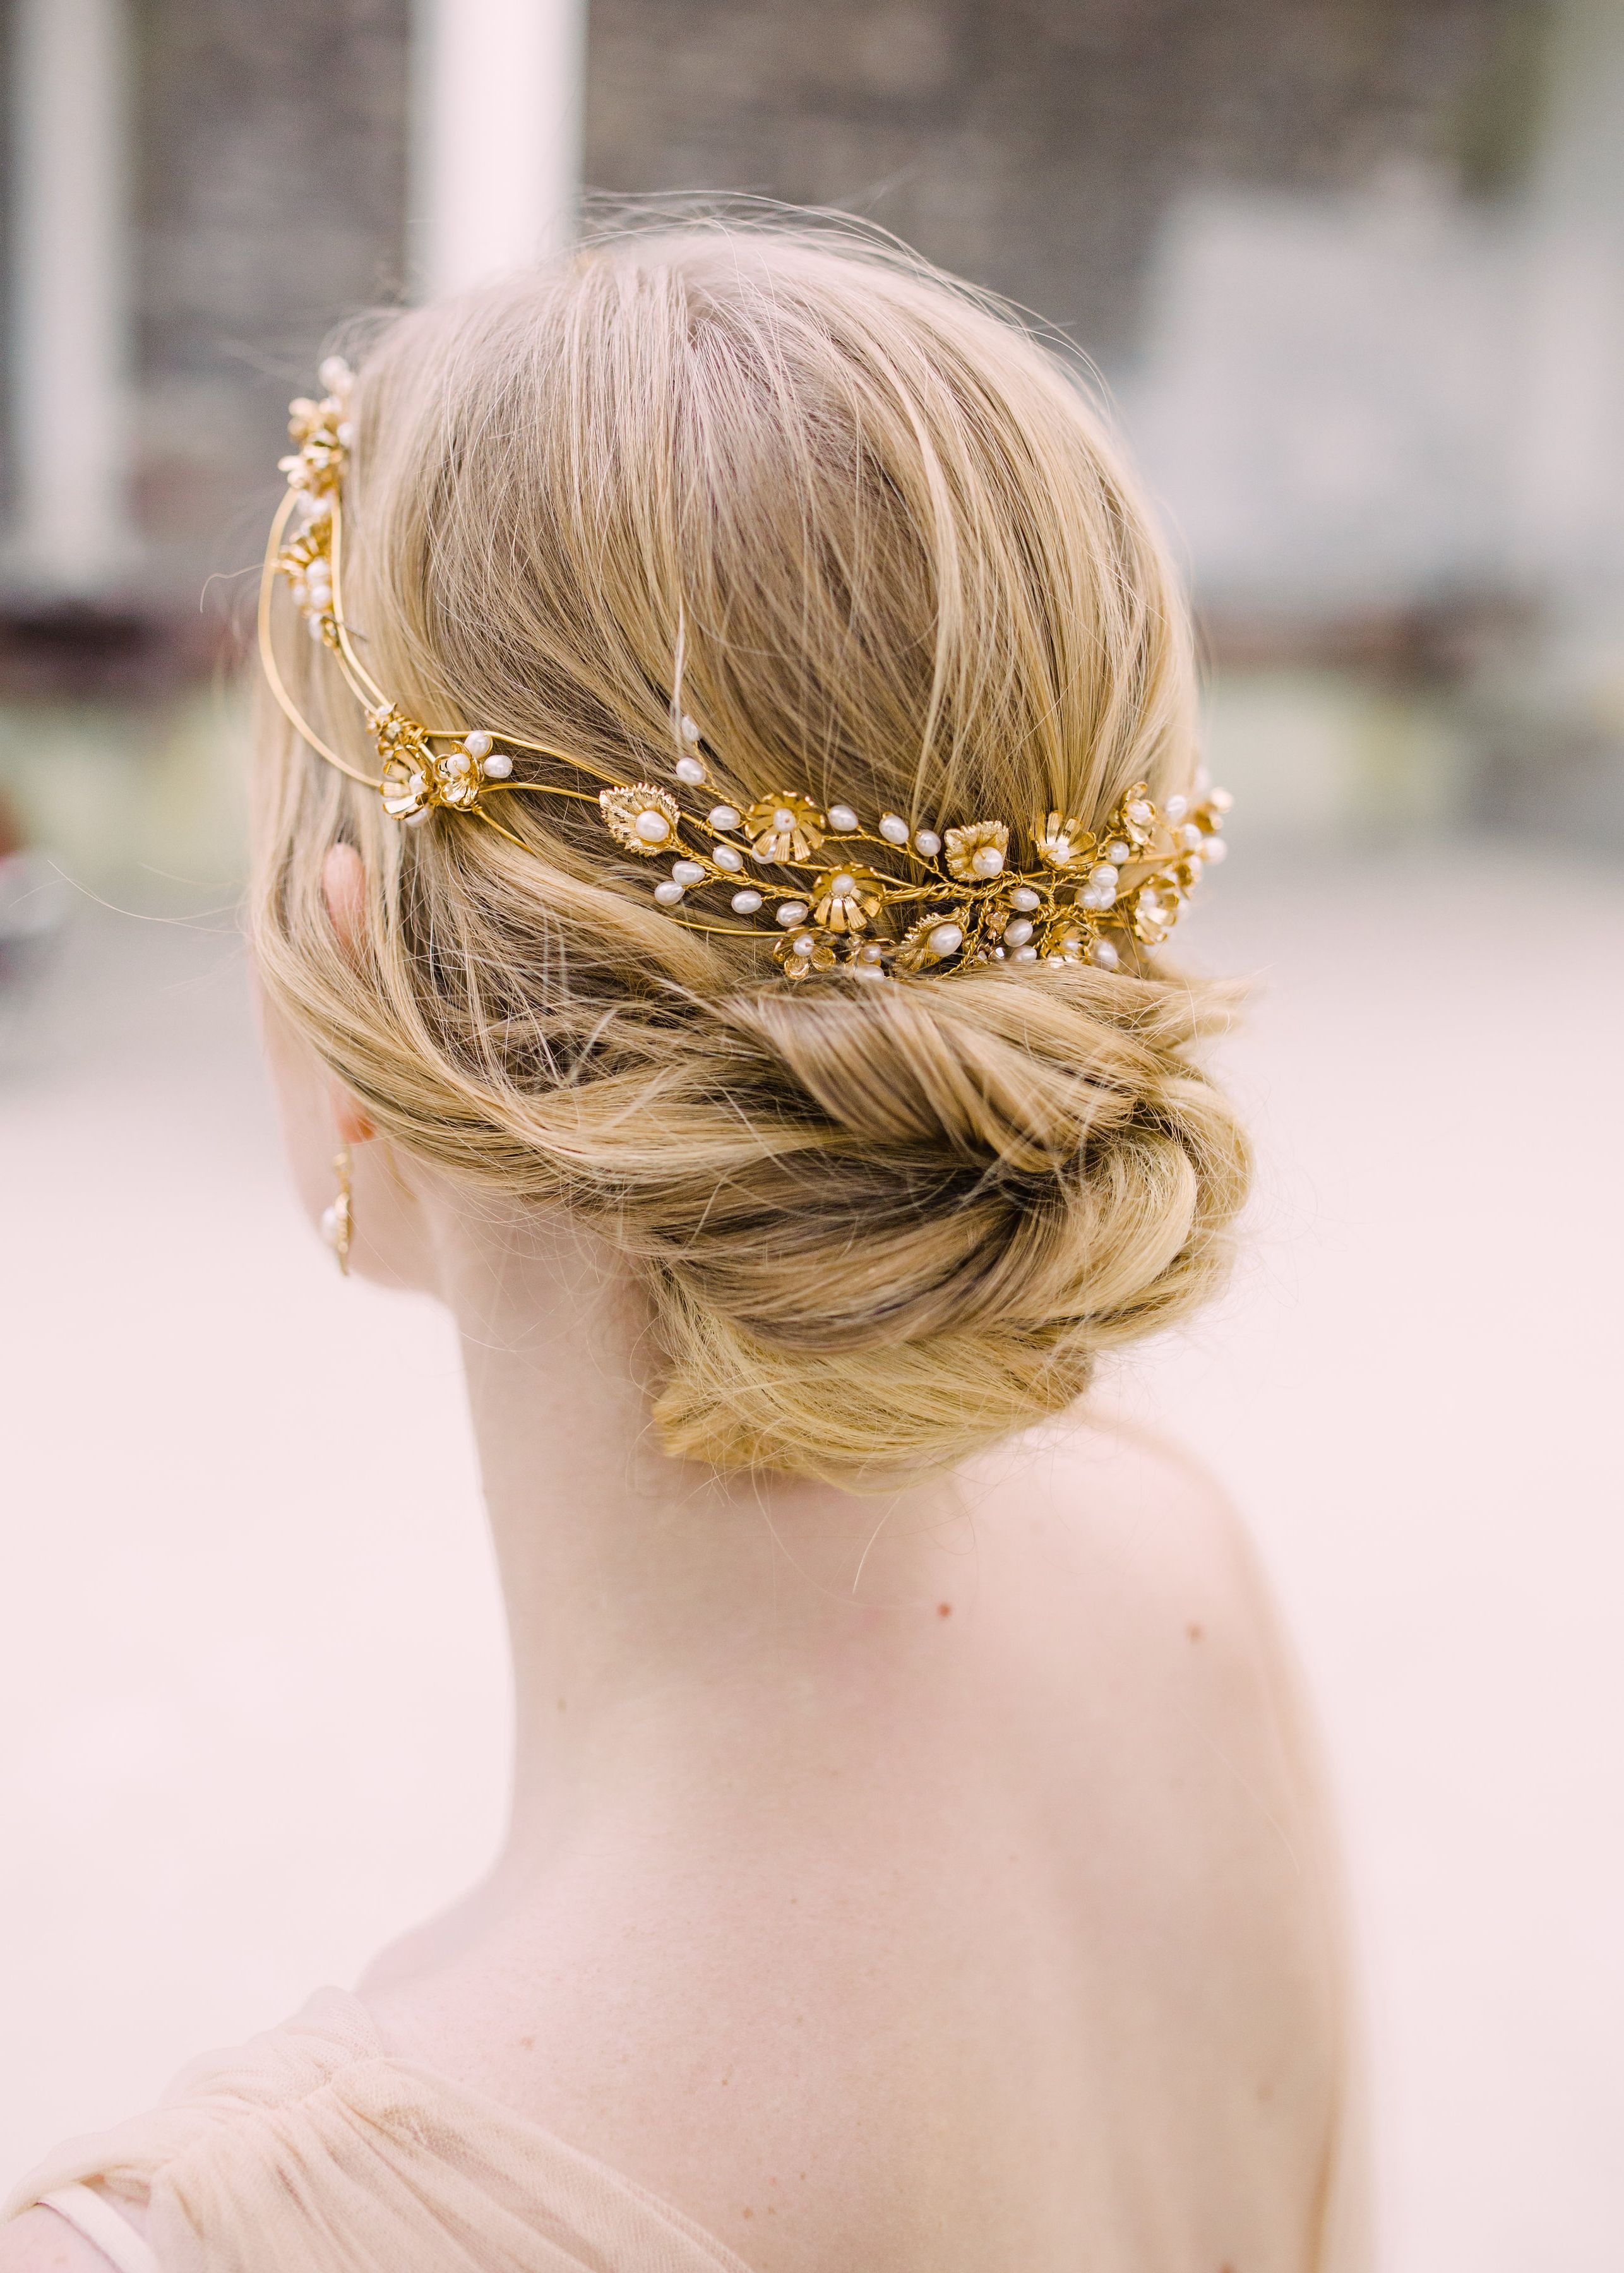 Bridal Hair Accessories: Accessorise Your Wedding Hairstyle – Hair Within Latest Chignon Wedding Hairstyles With Pinned Up Embellishment (View 5 of 20)